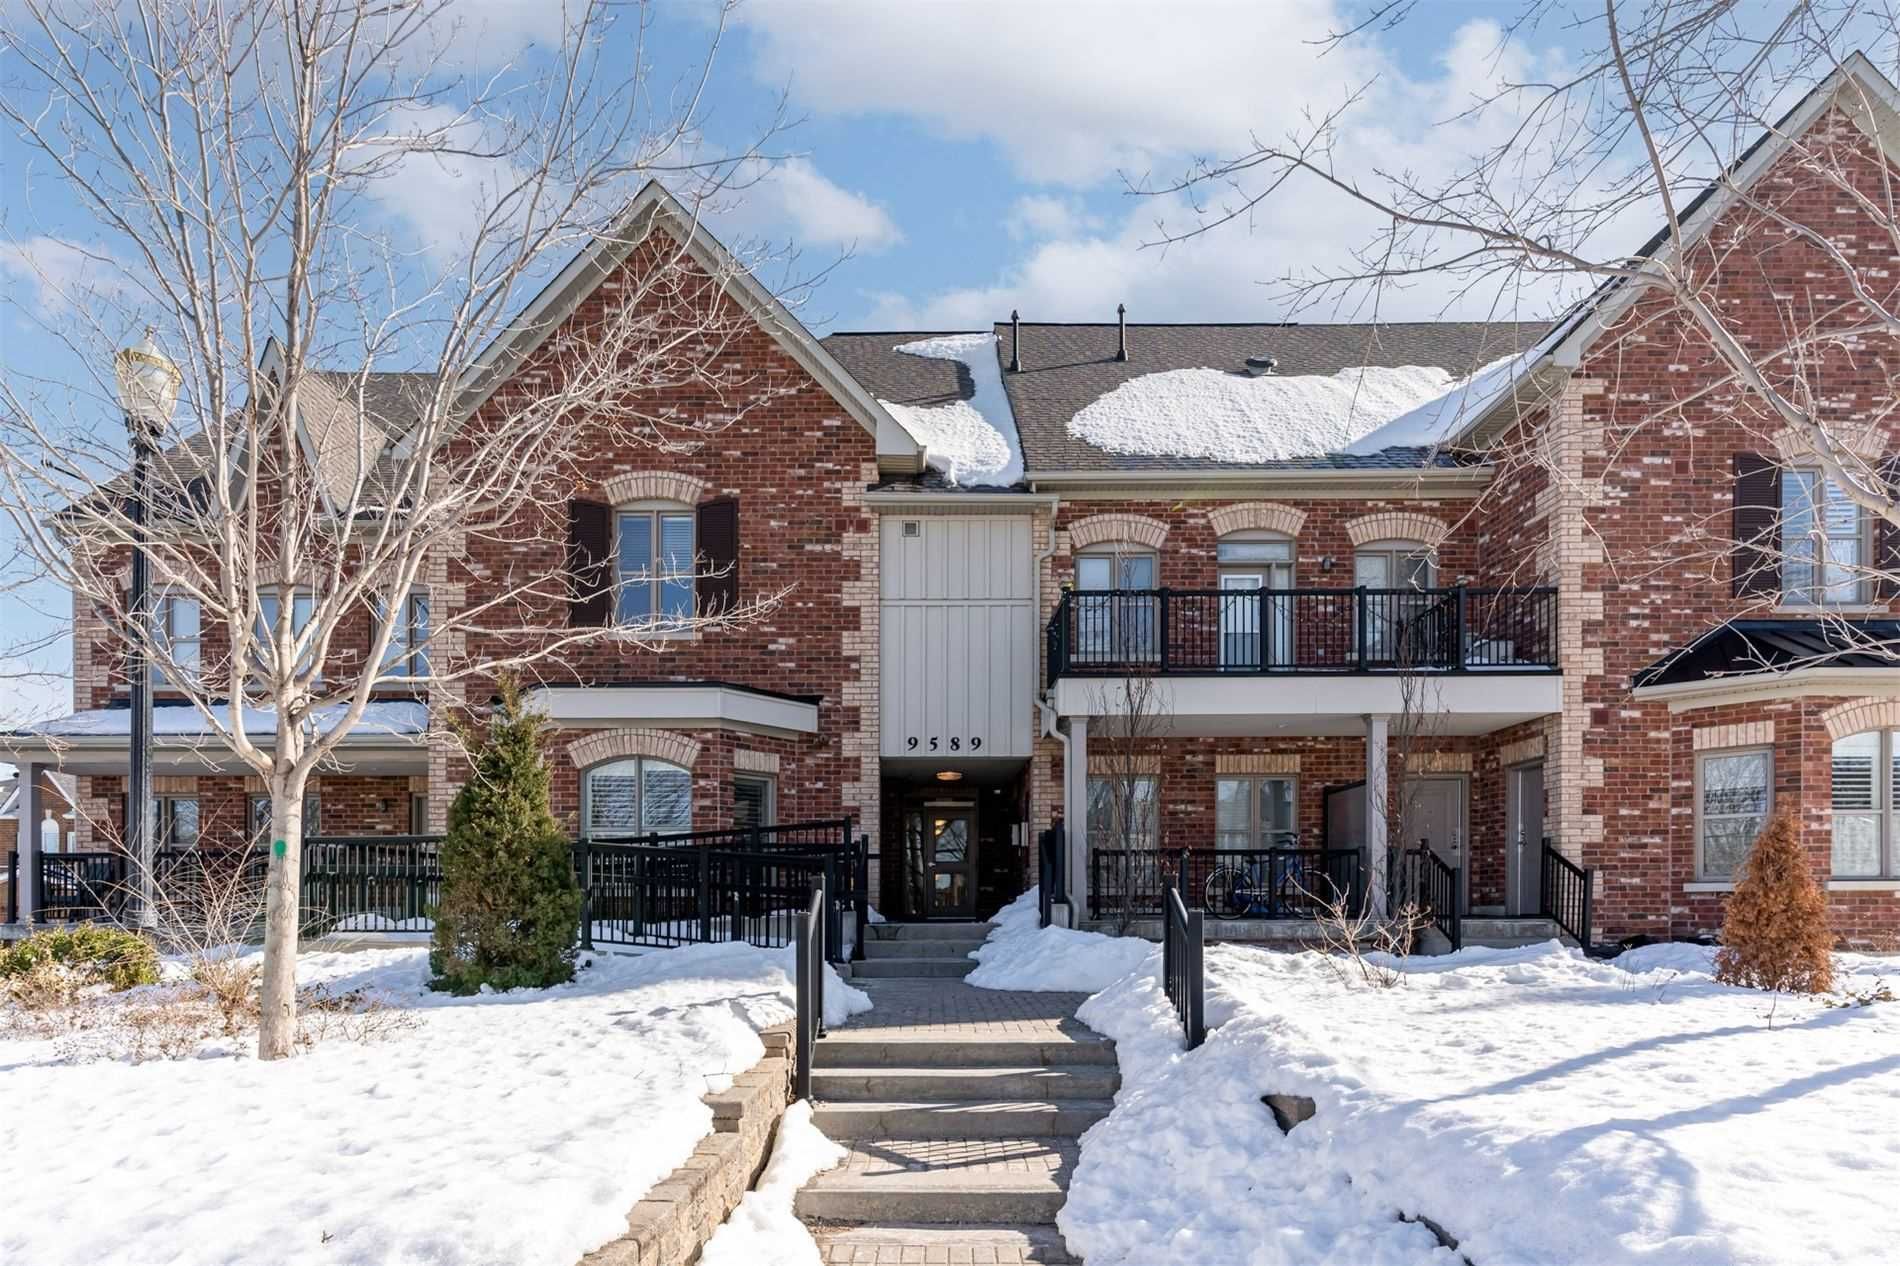 Main Photo: 9589 Keele Street St in Vaughan: Maple Condo for sale : MLS®# N6001093. Vaughan Condo Townhouse Style Property For Sale in Maple at Keele & Rutherford. Call your vaughan condo experts Steven J Commisso & Marie Commisso from Vaughan Real Estate at vaughancondoexperts.com